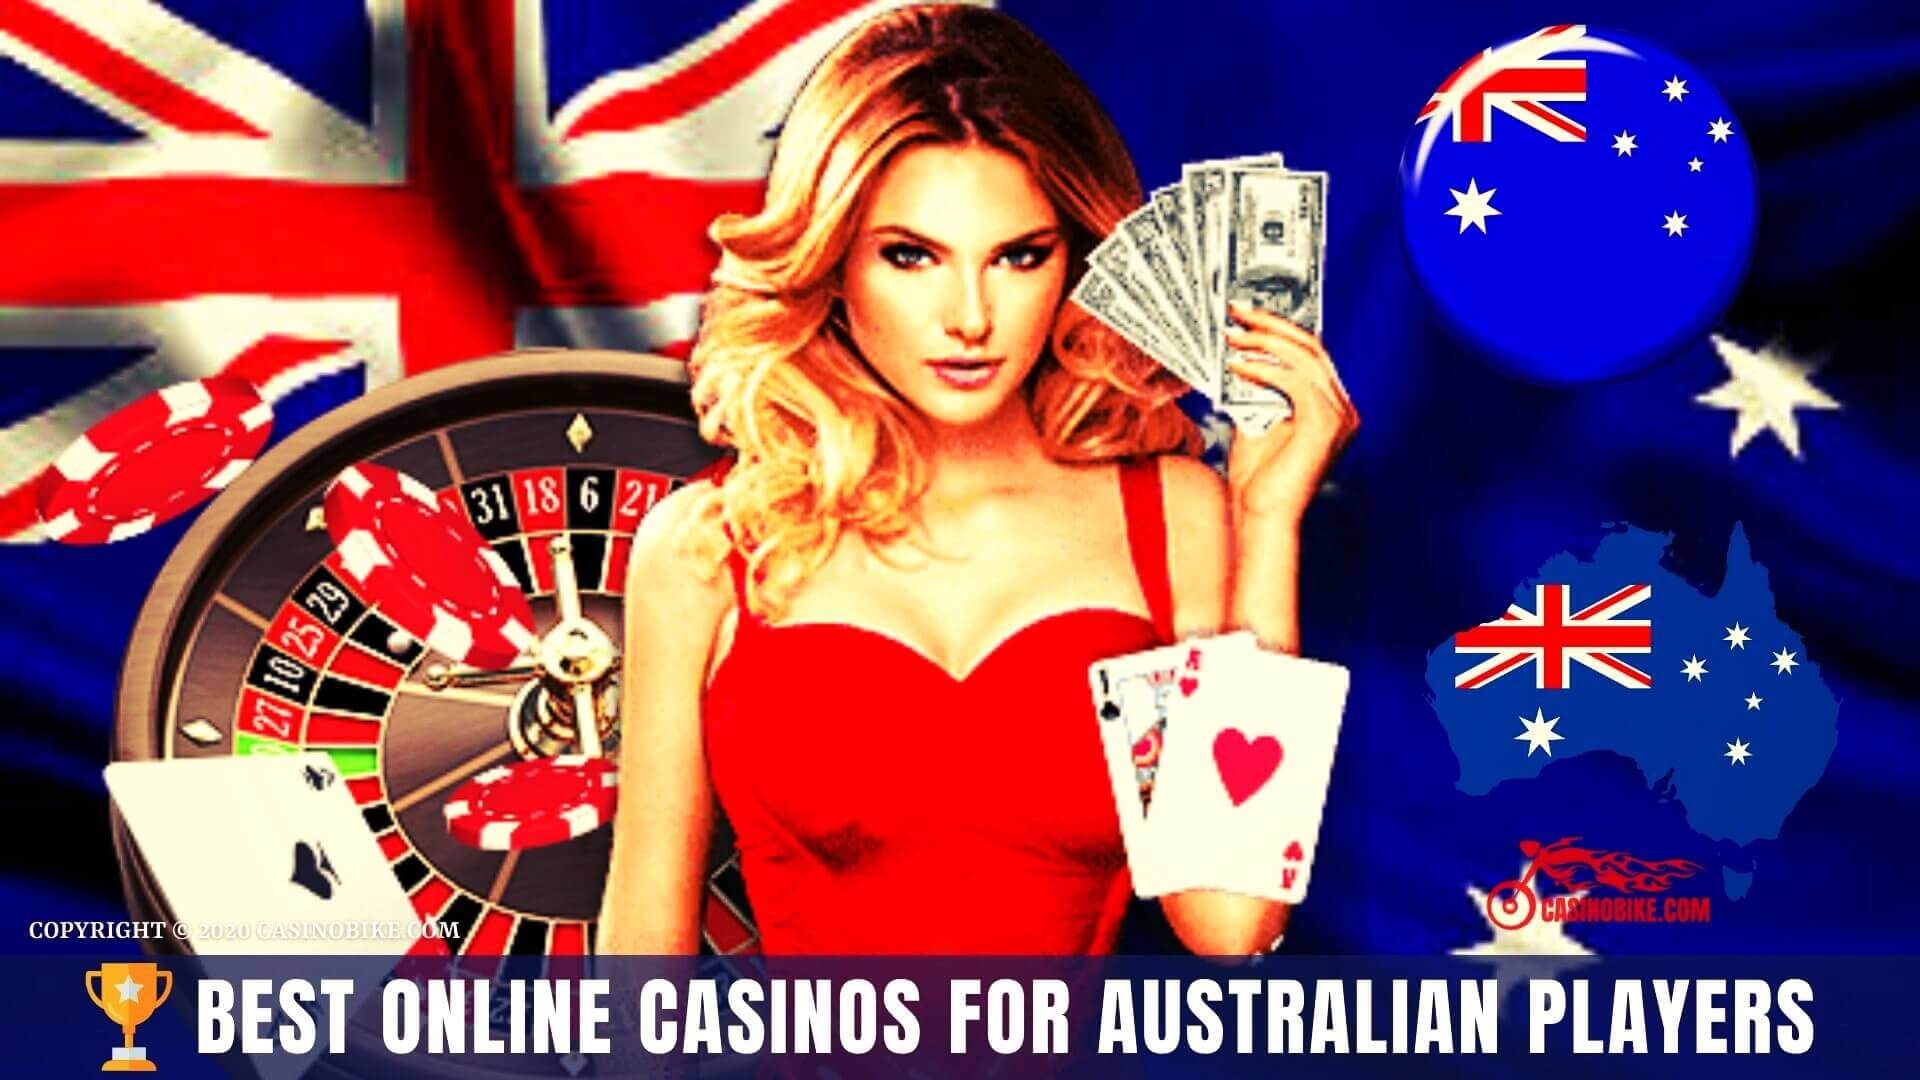 Get Better best online casino sites Results By Following 3 Simple Steps